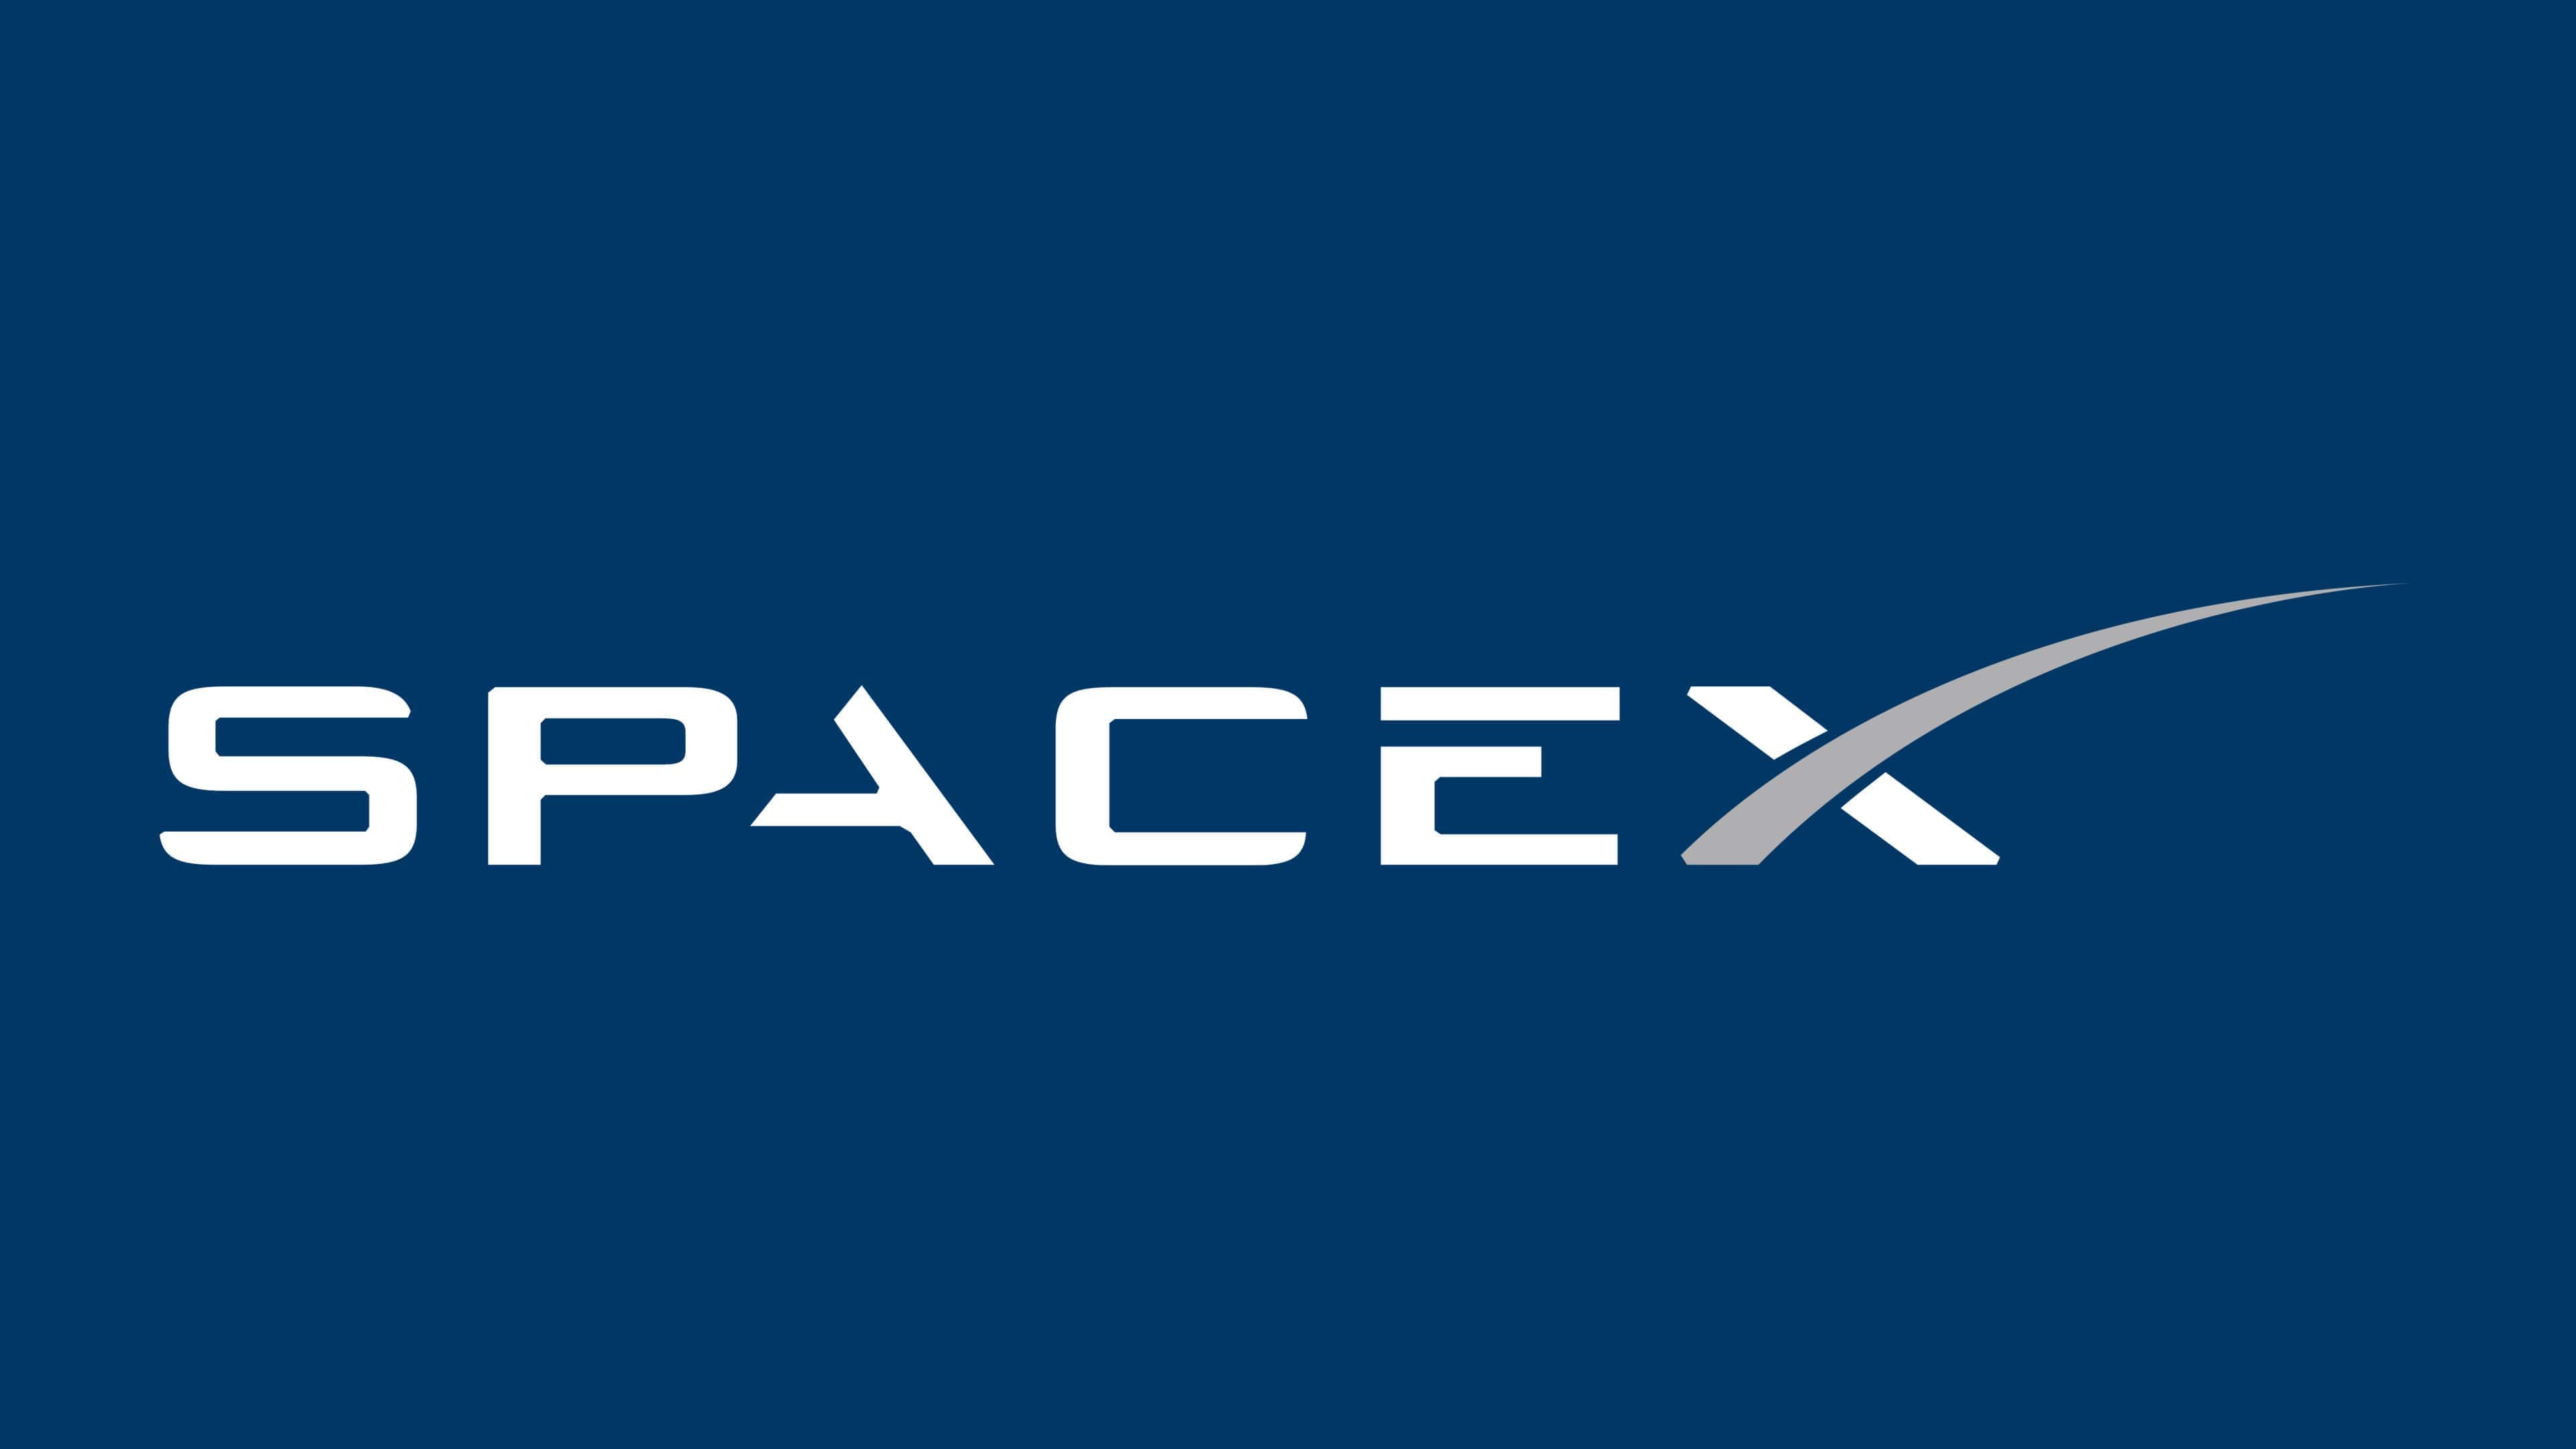 Spacex Logo The Most Famous Brands And Company Logos In The World